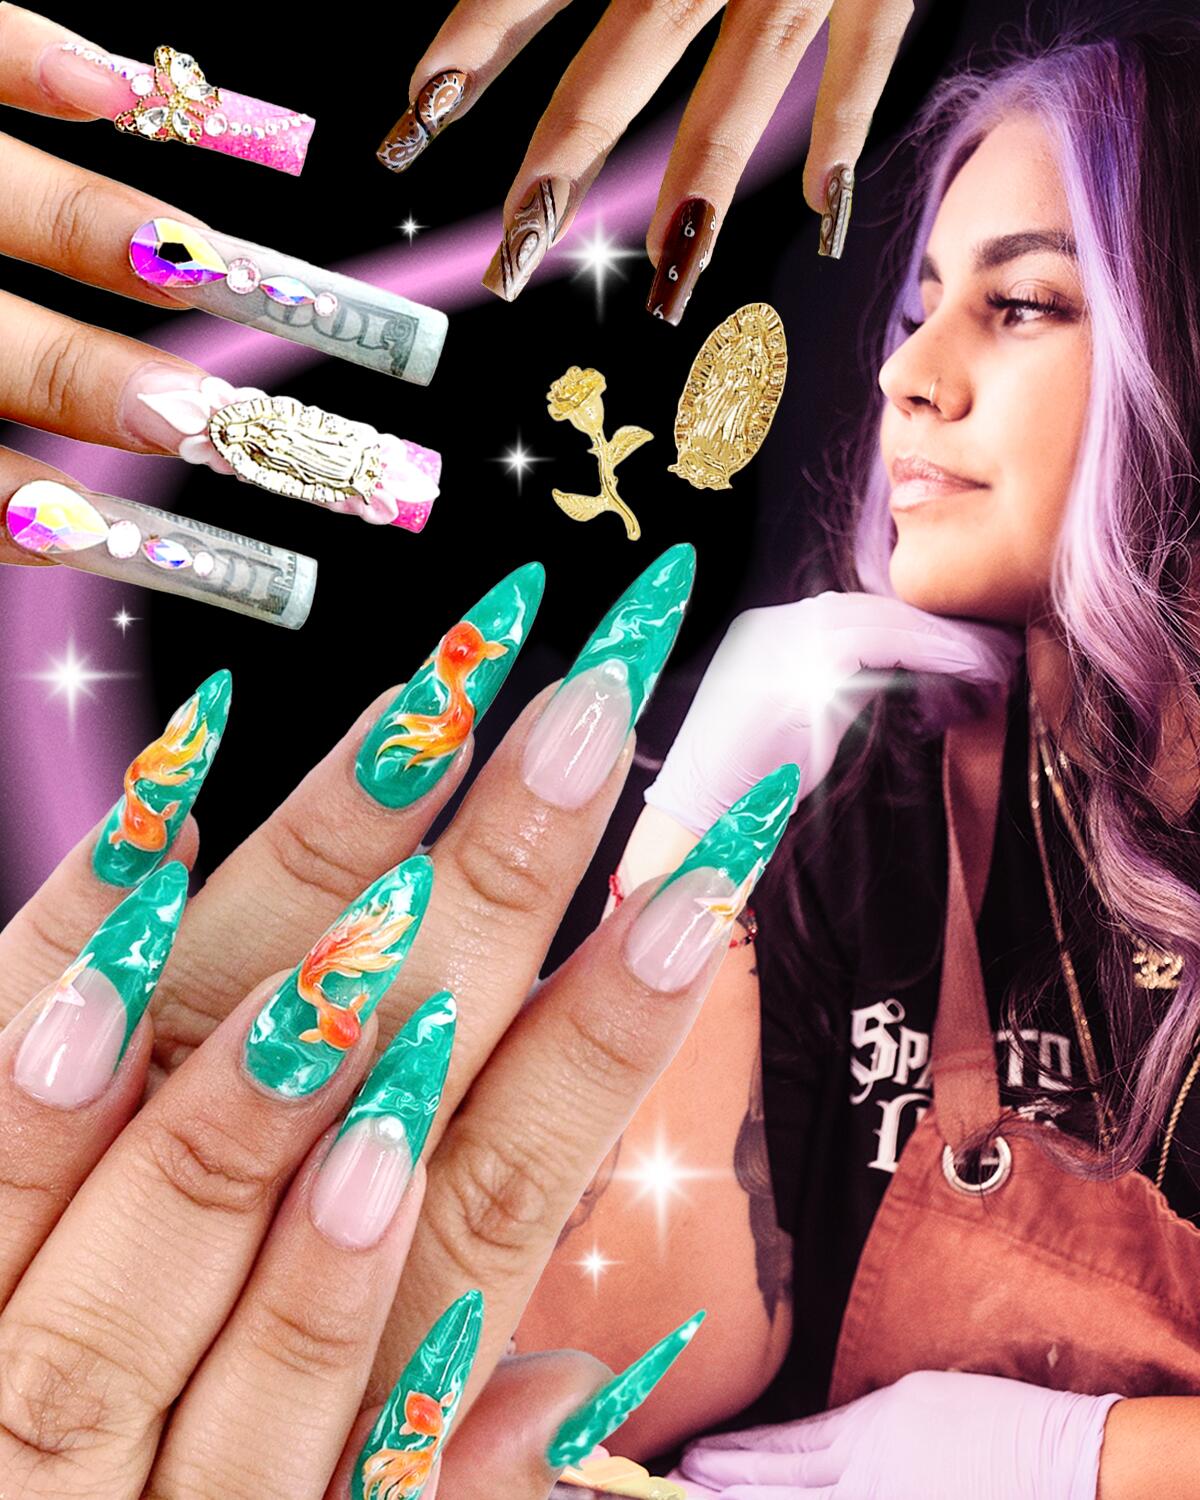 Latinidad is inspiring these nail artists' intricate designs